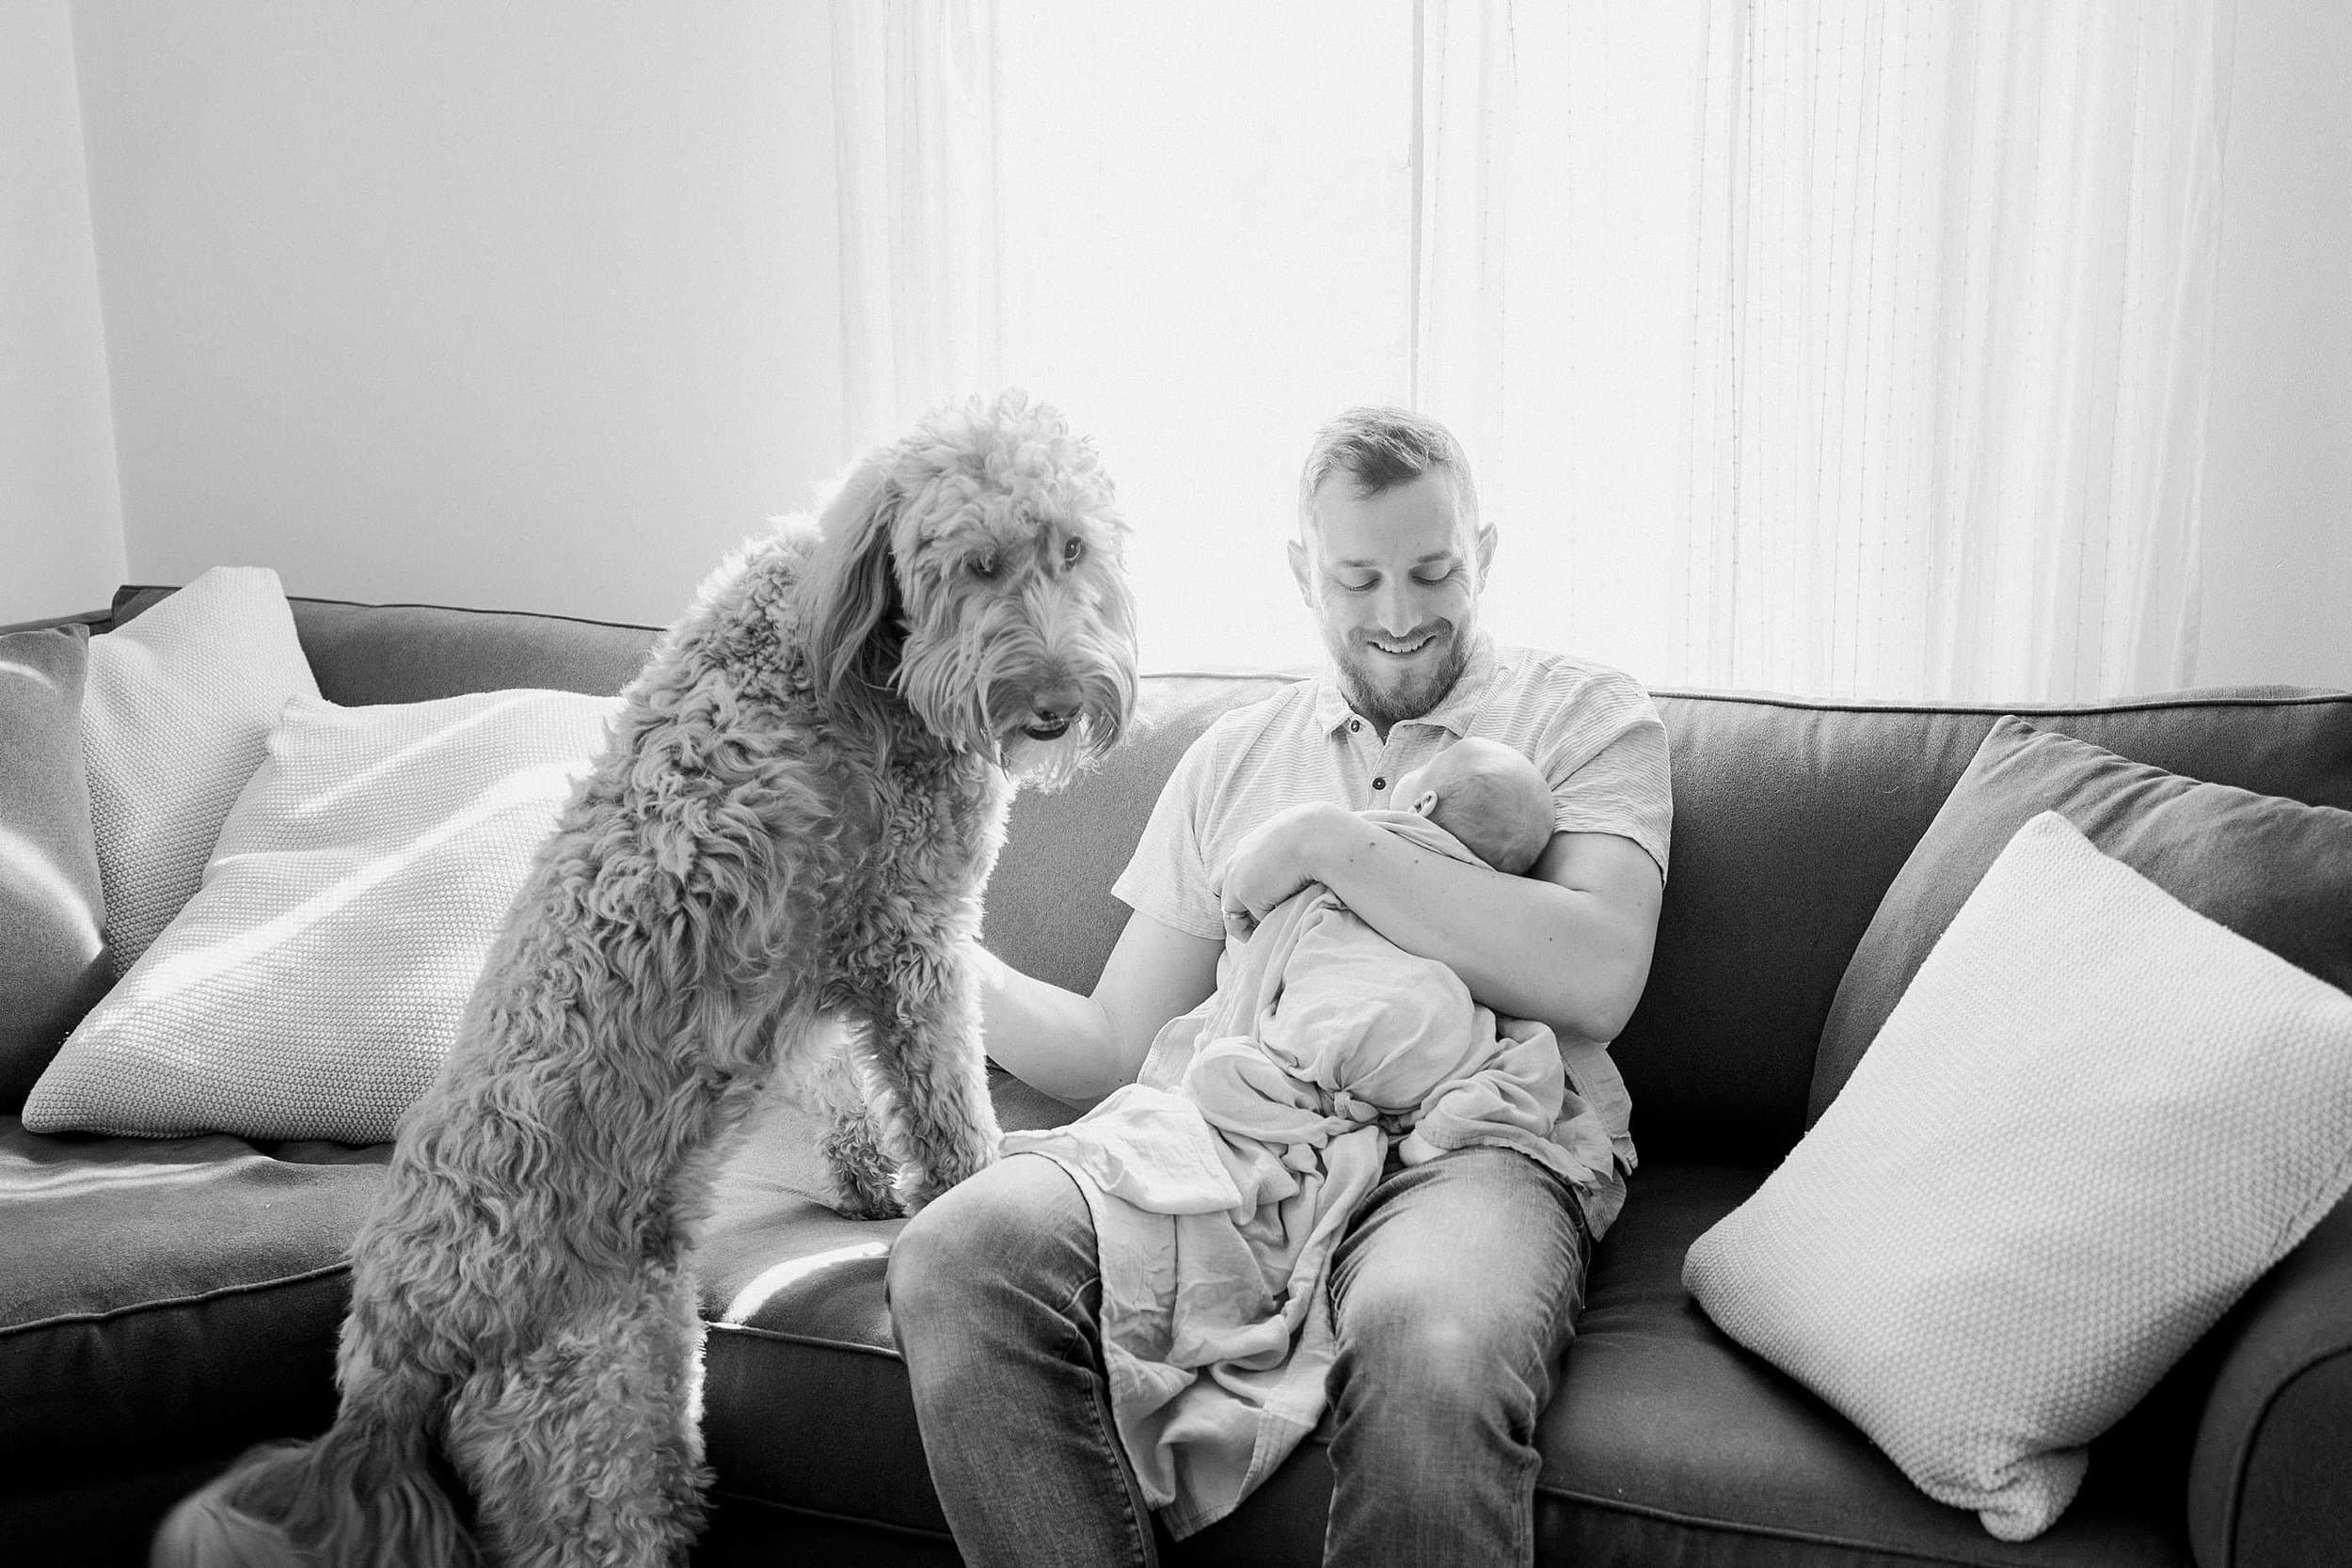 A big Goldendoodle dog standing on the couch next to a dad and a newborn baby